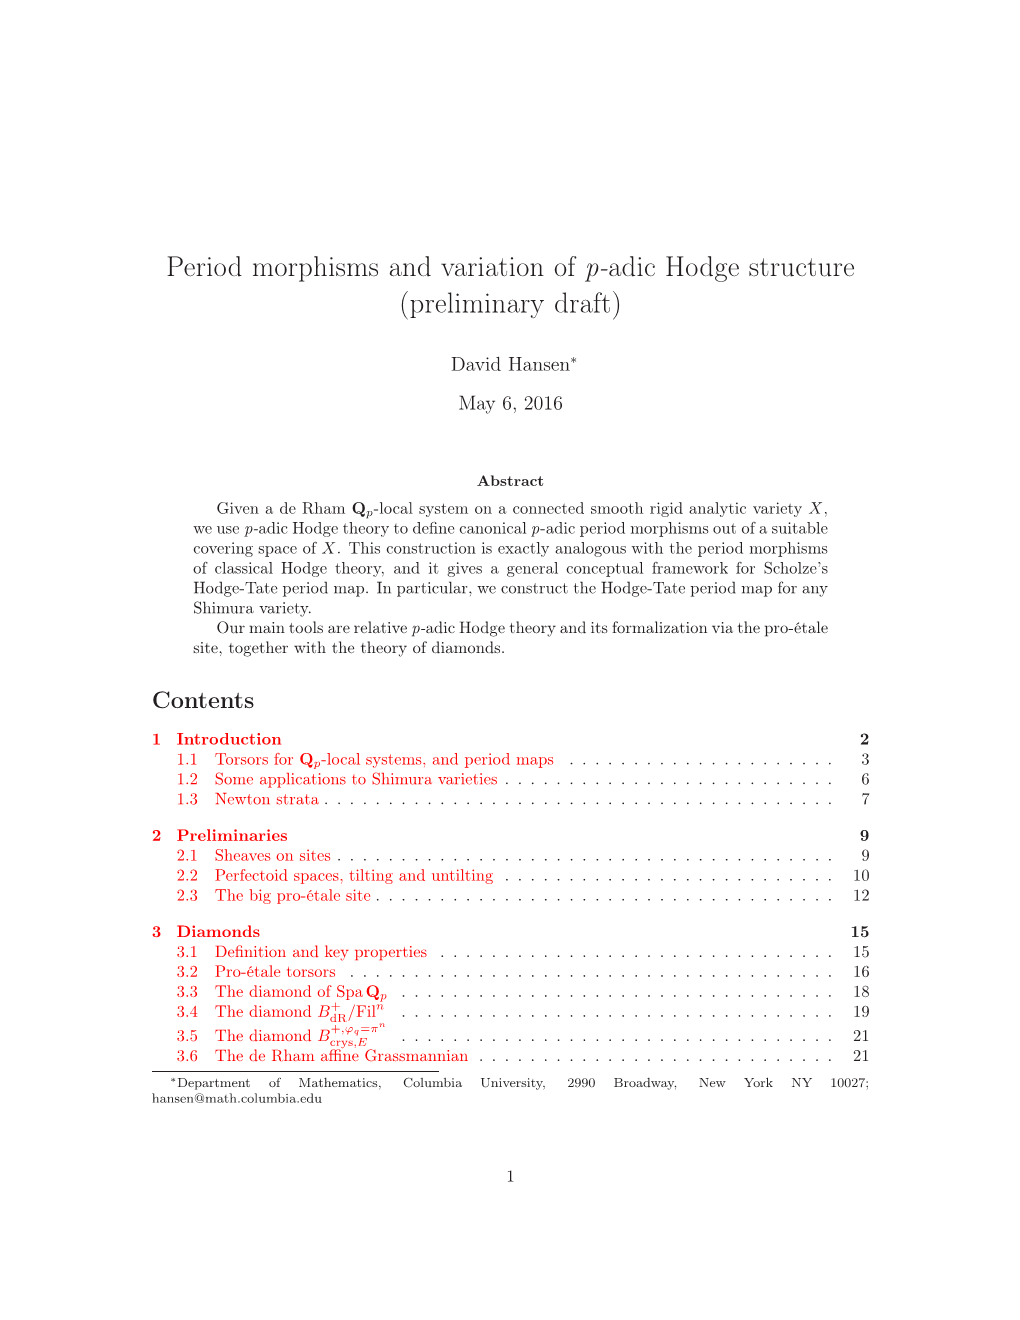 Period Morphisms and Variation of P-Adic Hodge Structure (Preliminary Draft)